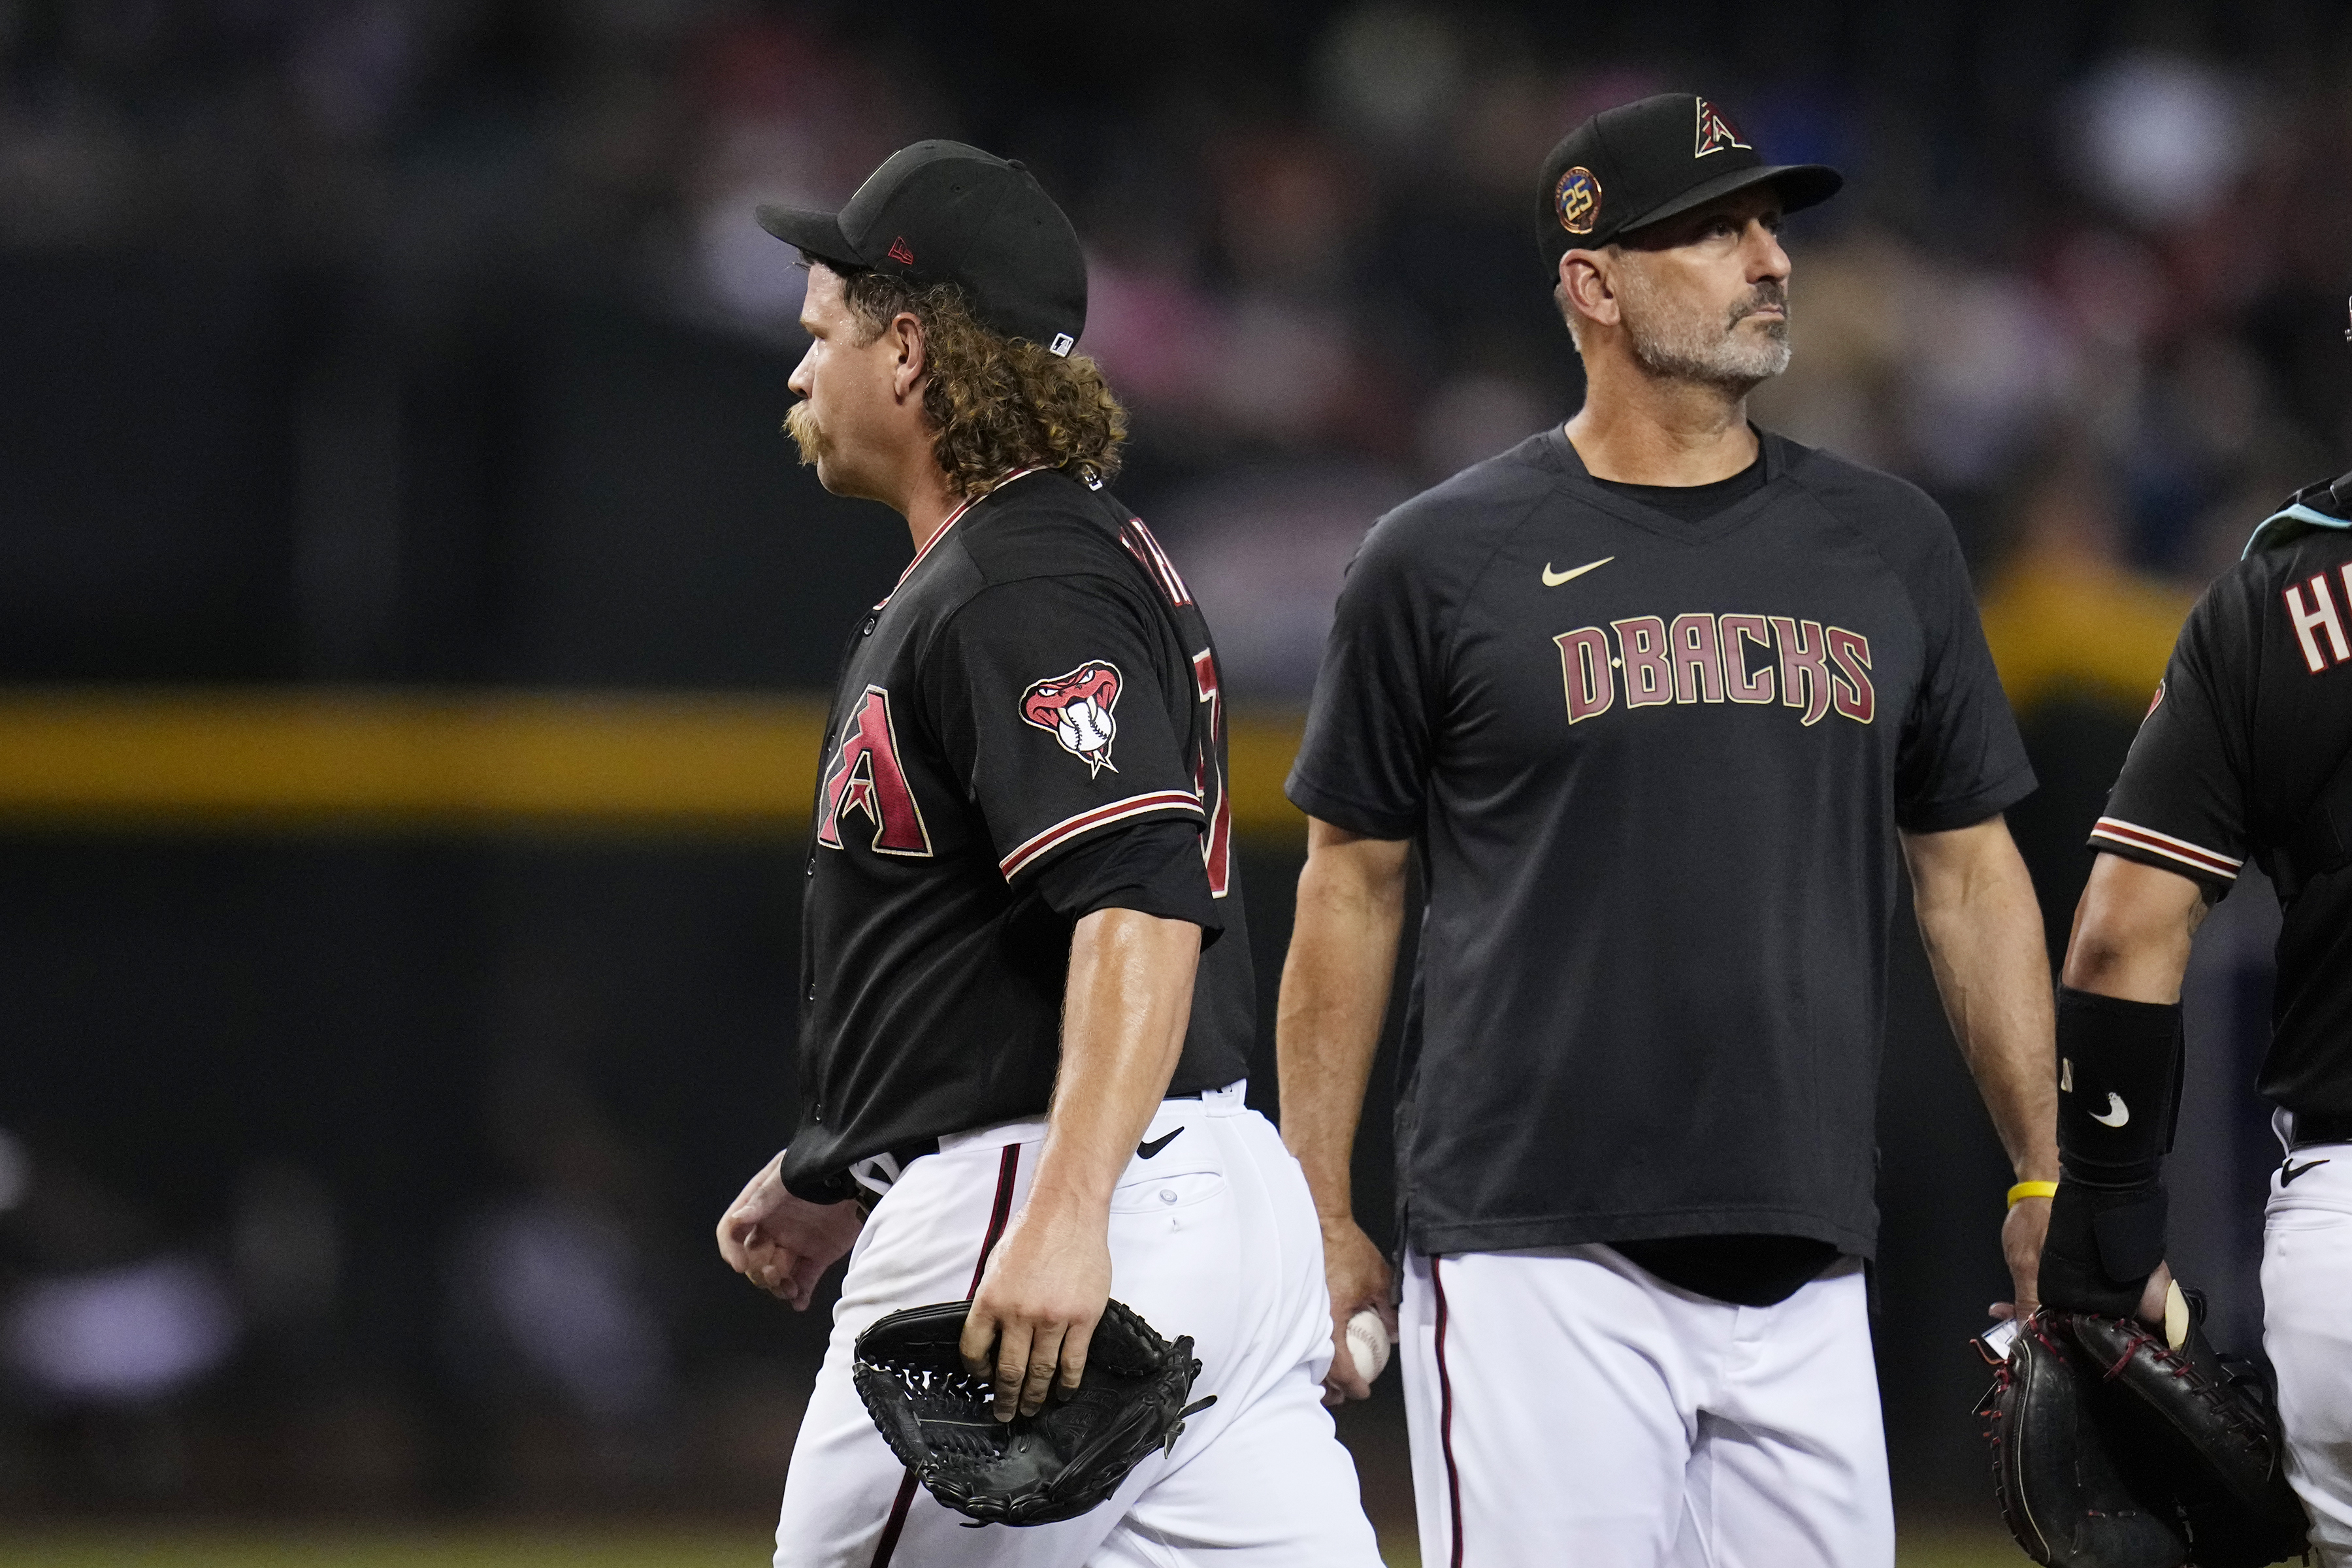 D-Backs manager Torey Lovullo confident team will be better in